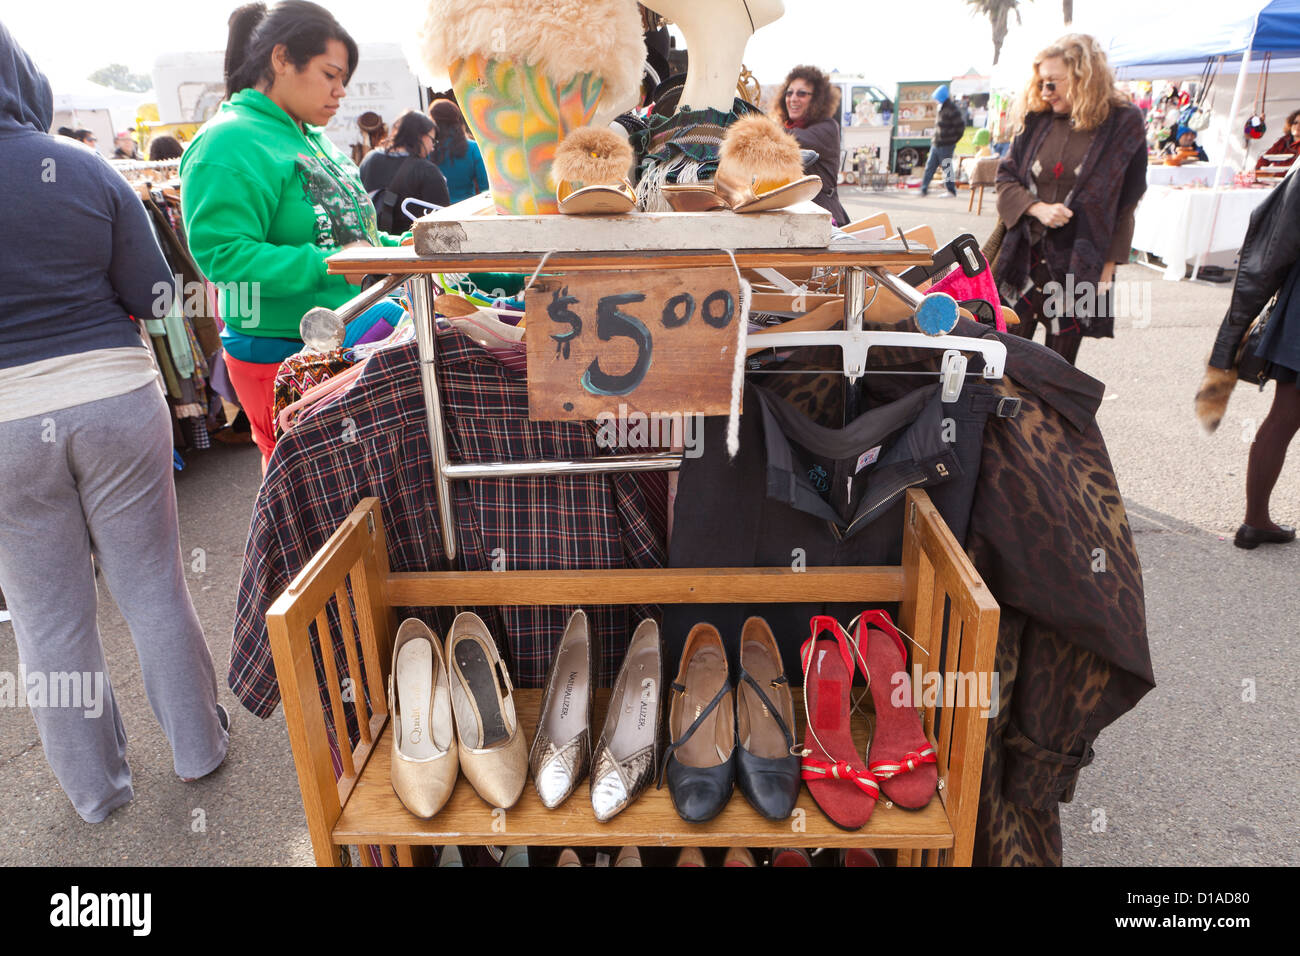 Ladies shoes and clothes on rack at an outdoor flea market - USA Stock Photo